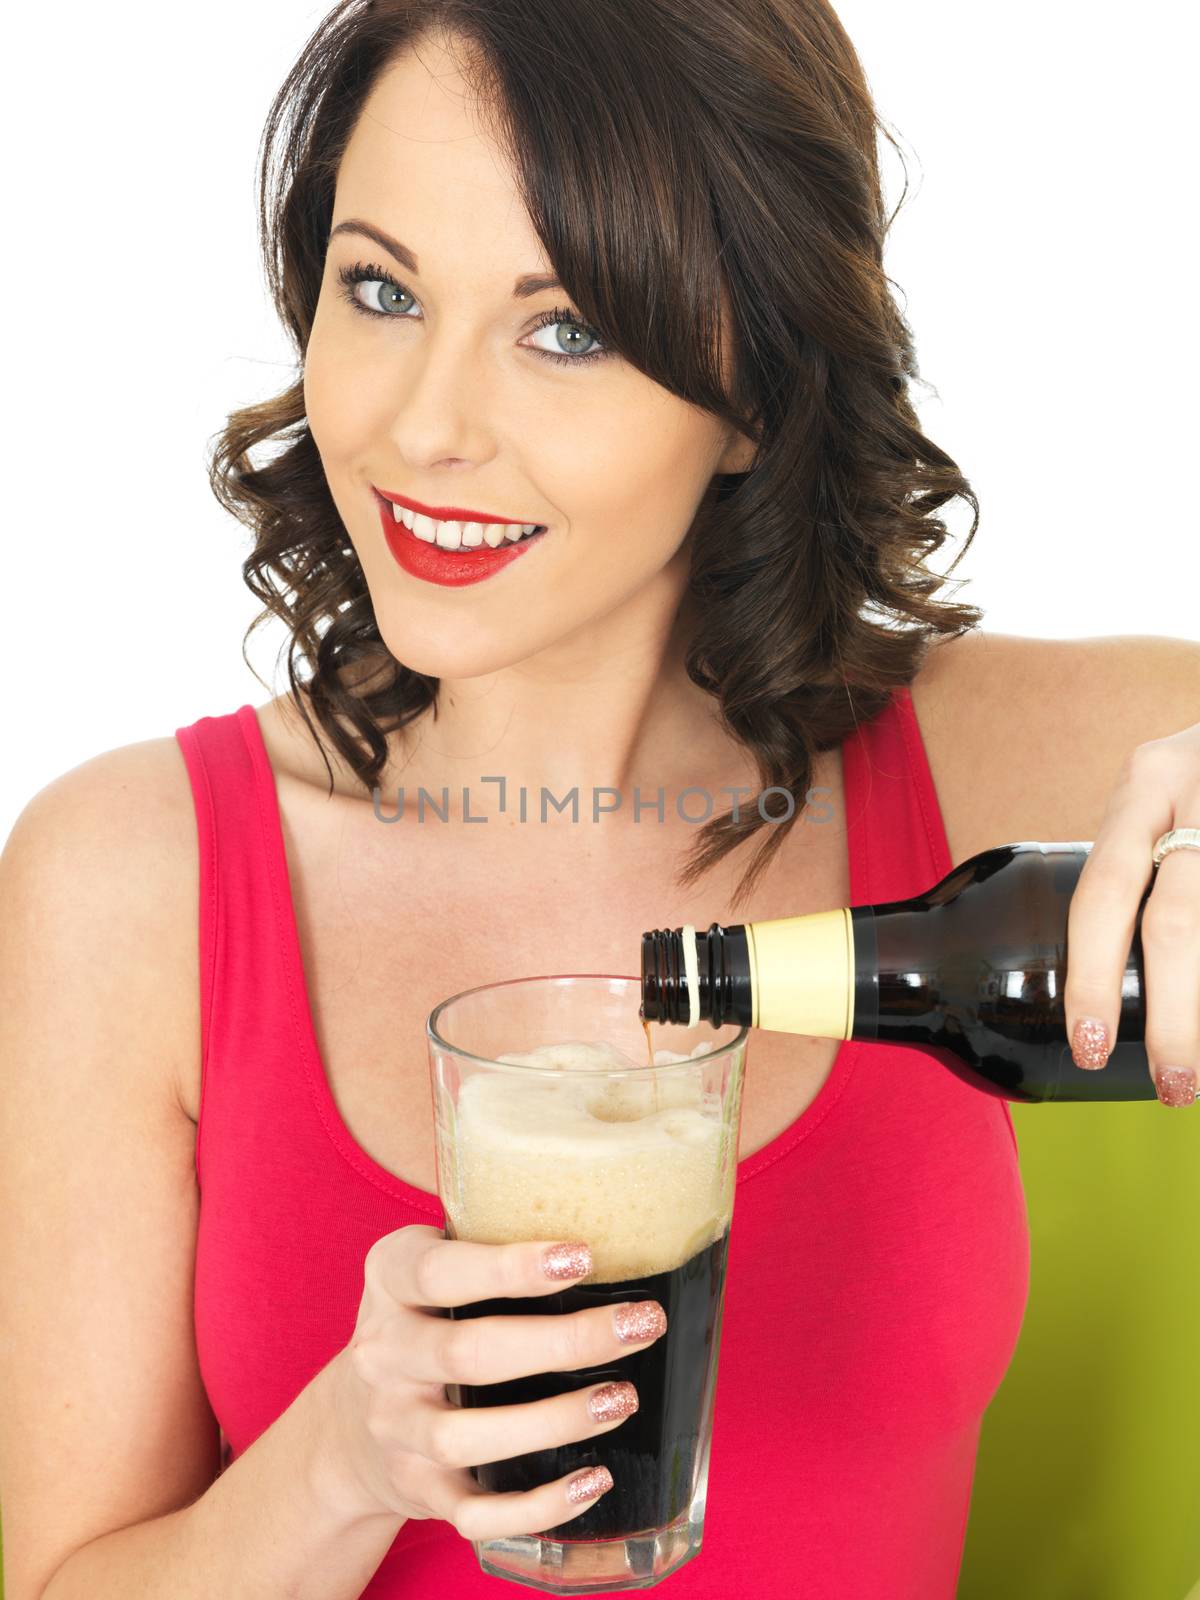 Attractive Young Woman Drinking Beer by Whiteboxmedia